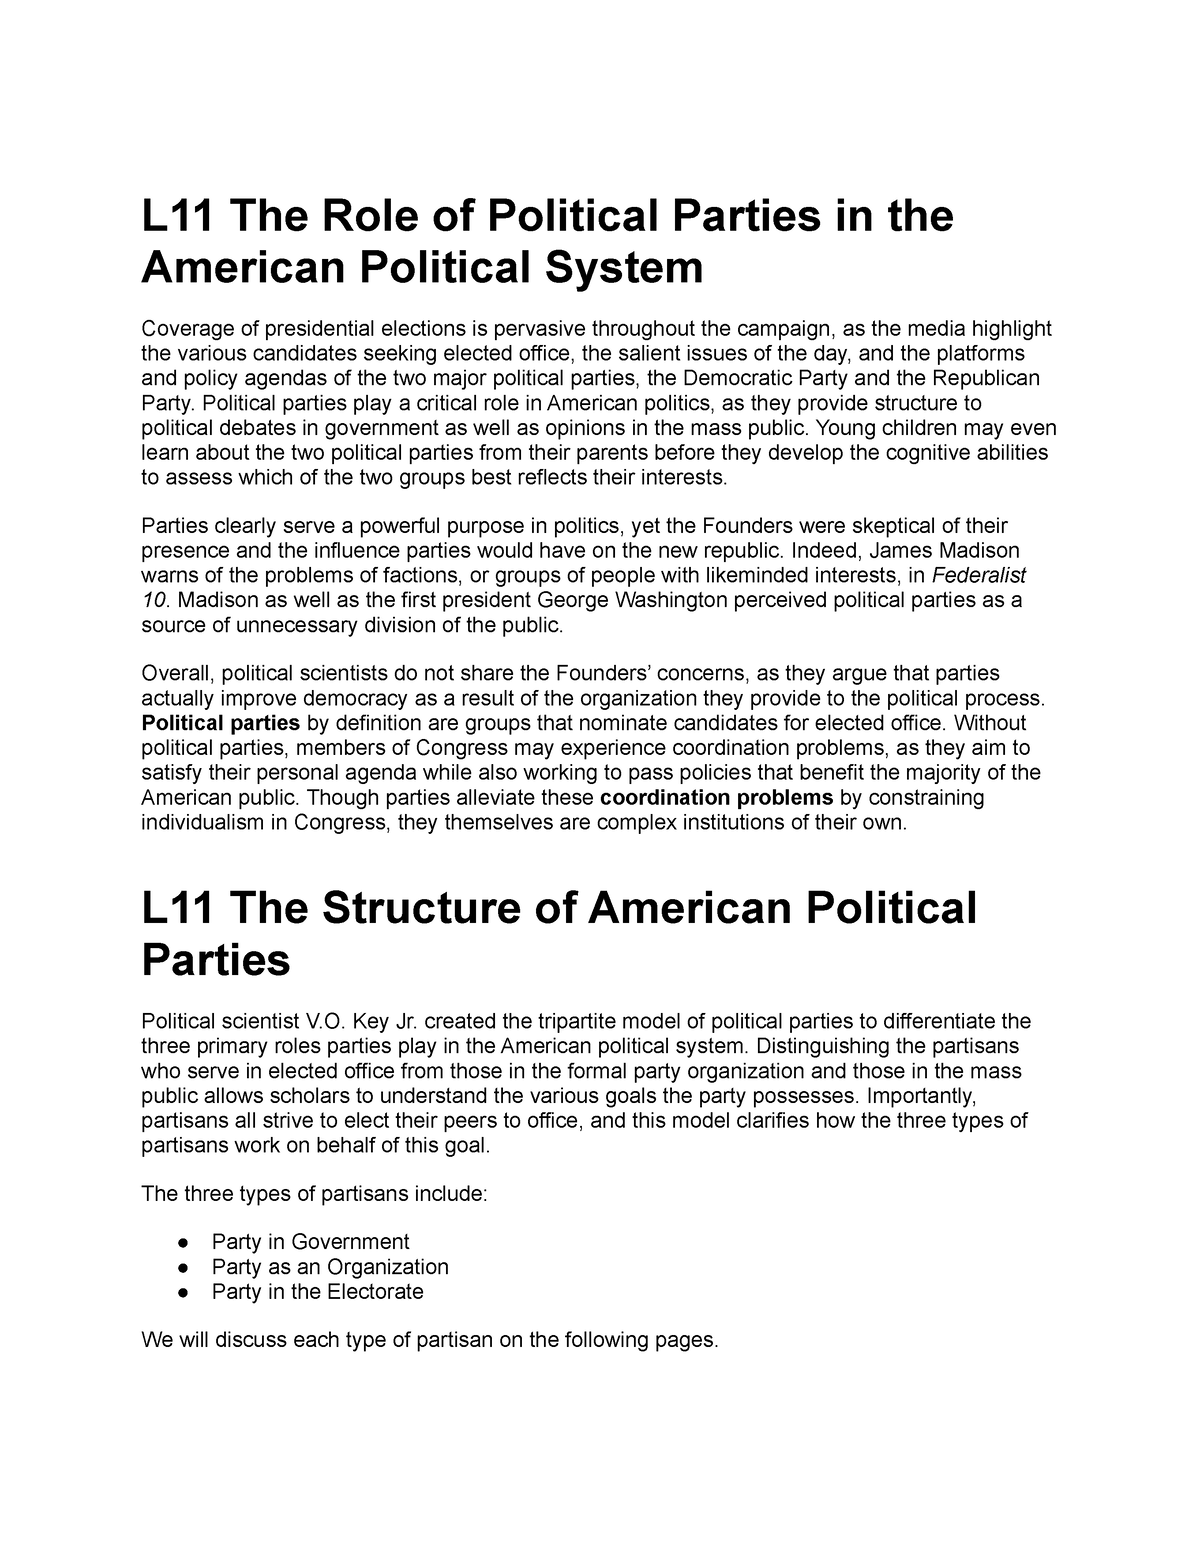 essay on us party system